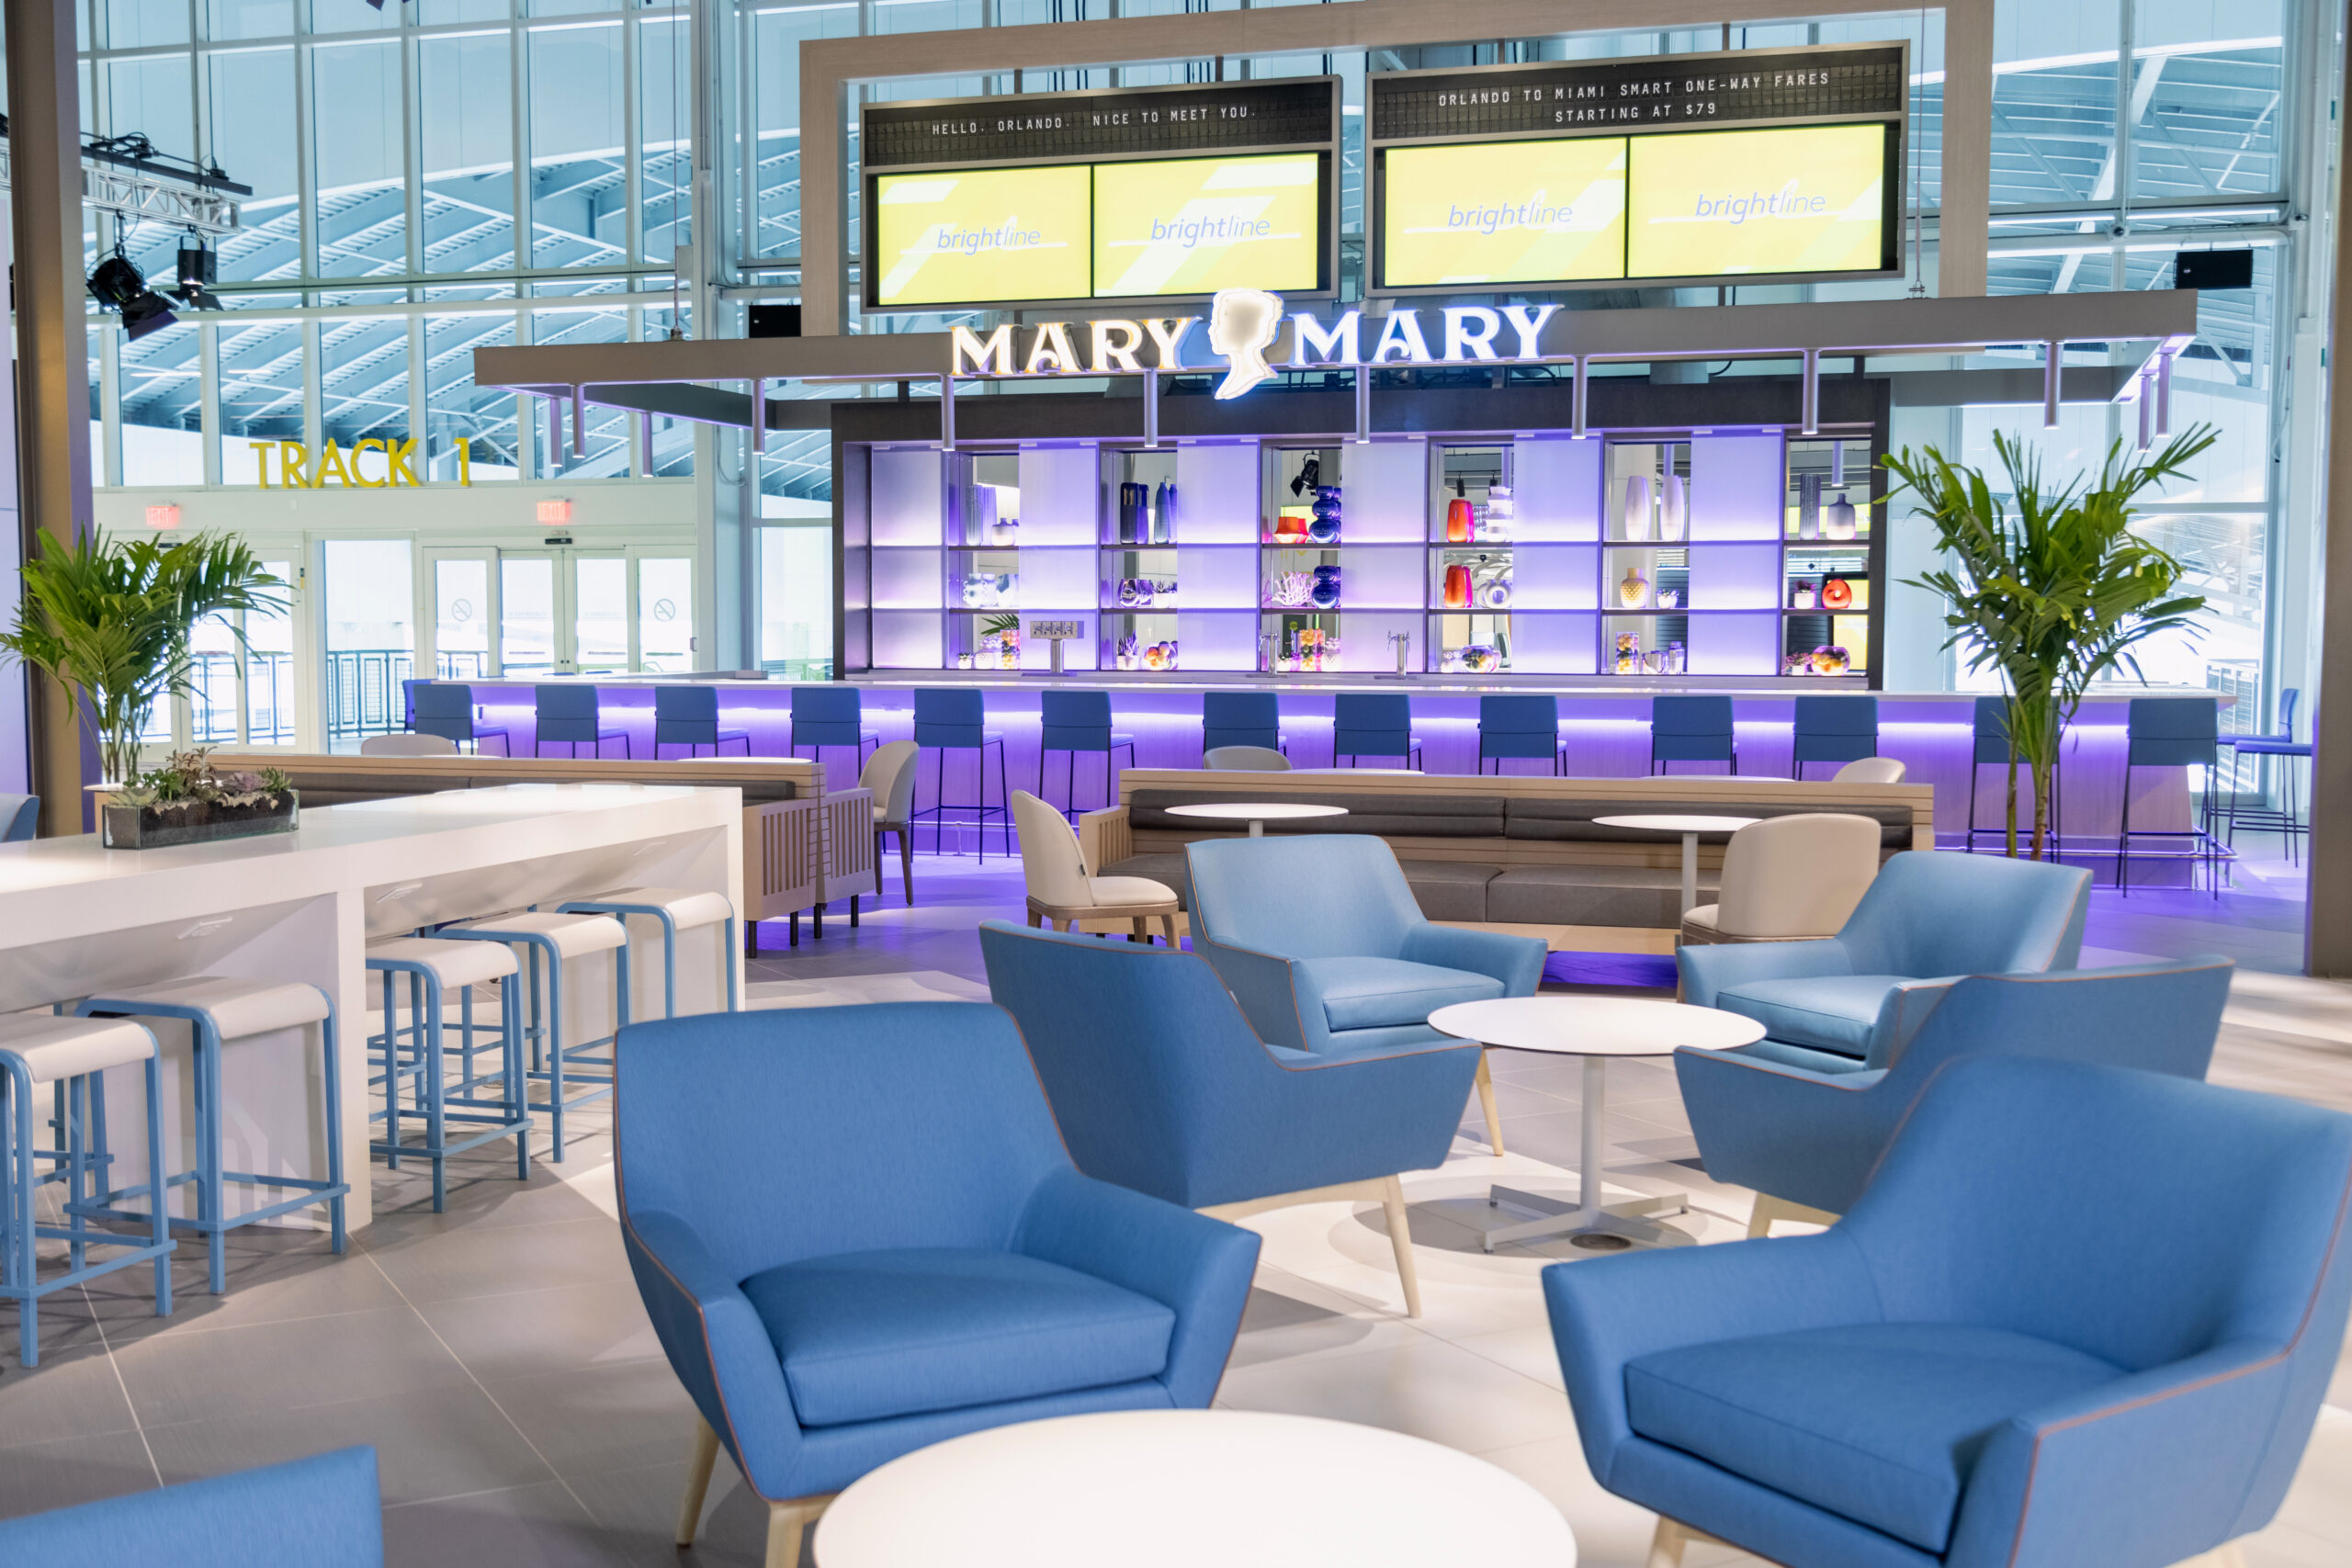 The sit-down Mary Mary bar is positioned at the far end of the station with a panoramic view overlooking the train platforms